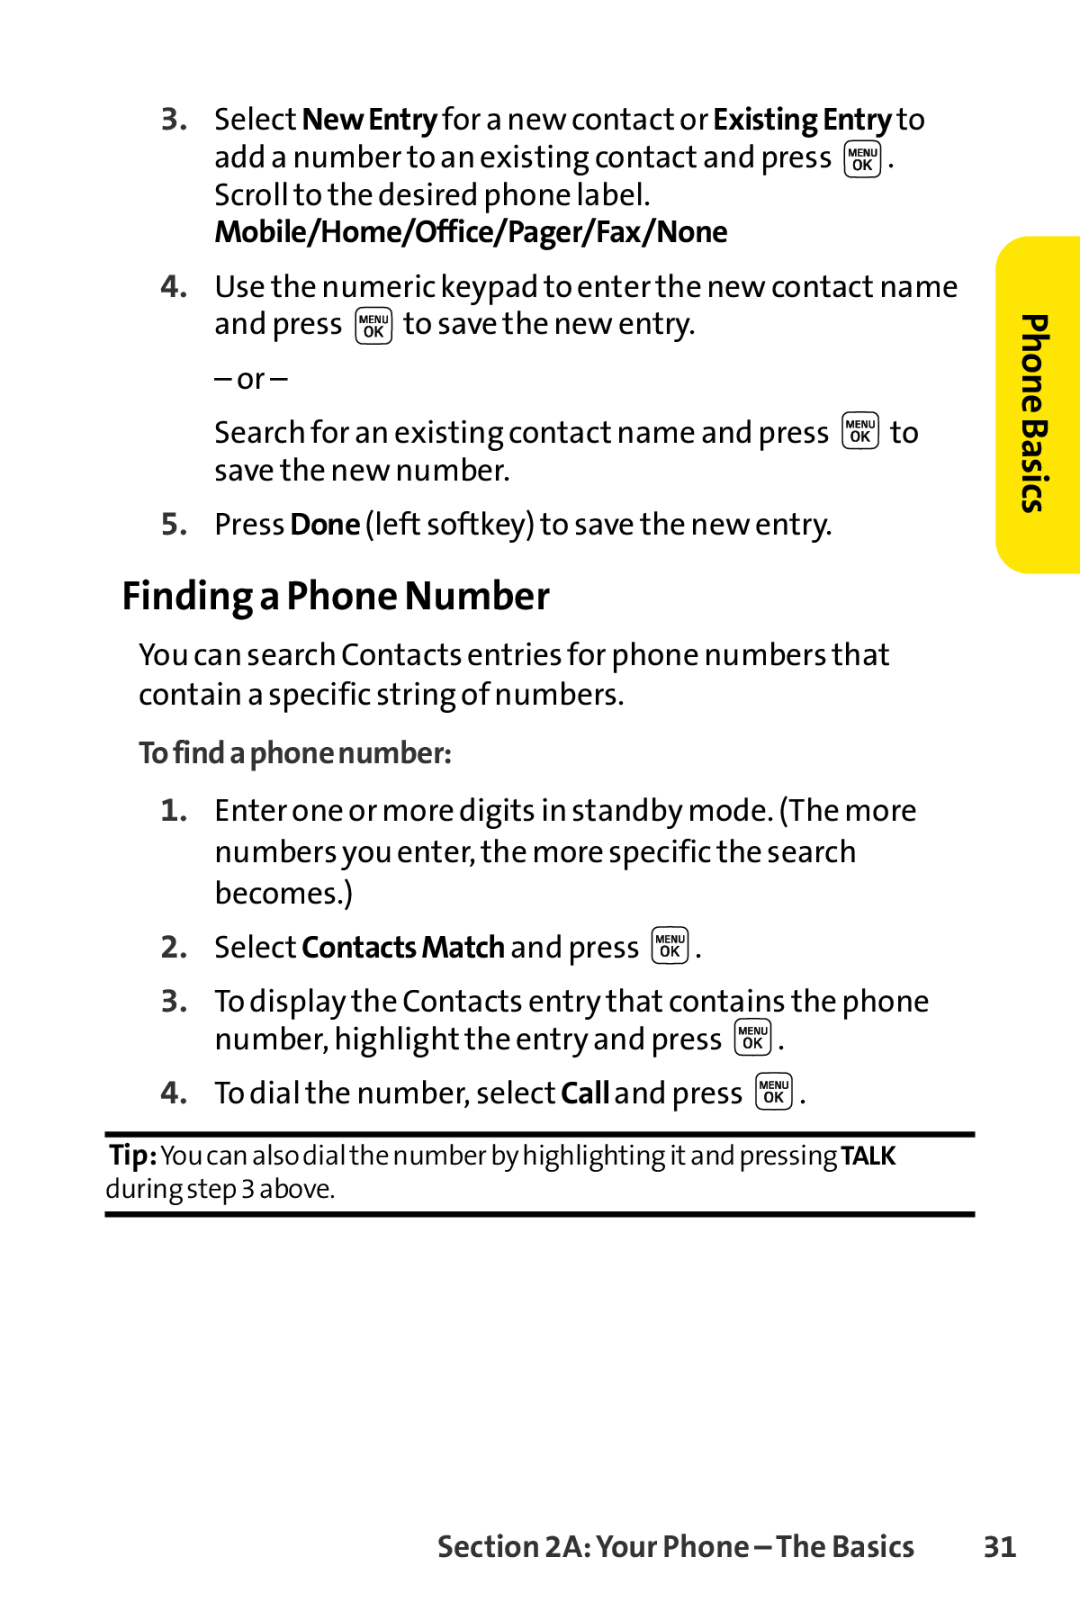 Sprint Nextel LX160 manual Finding a Phone Number, Mobile/Home/Office/Pager/Fax/None, Tofindaphonenumber, Phone Basics 